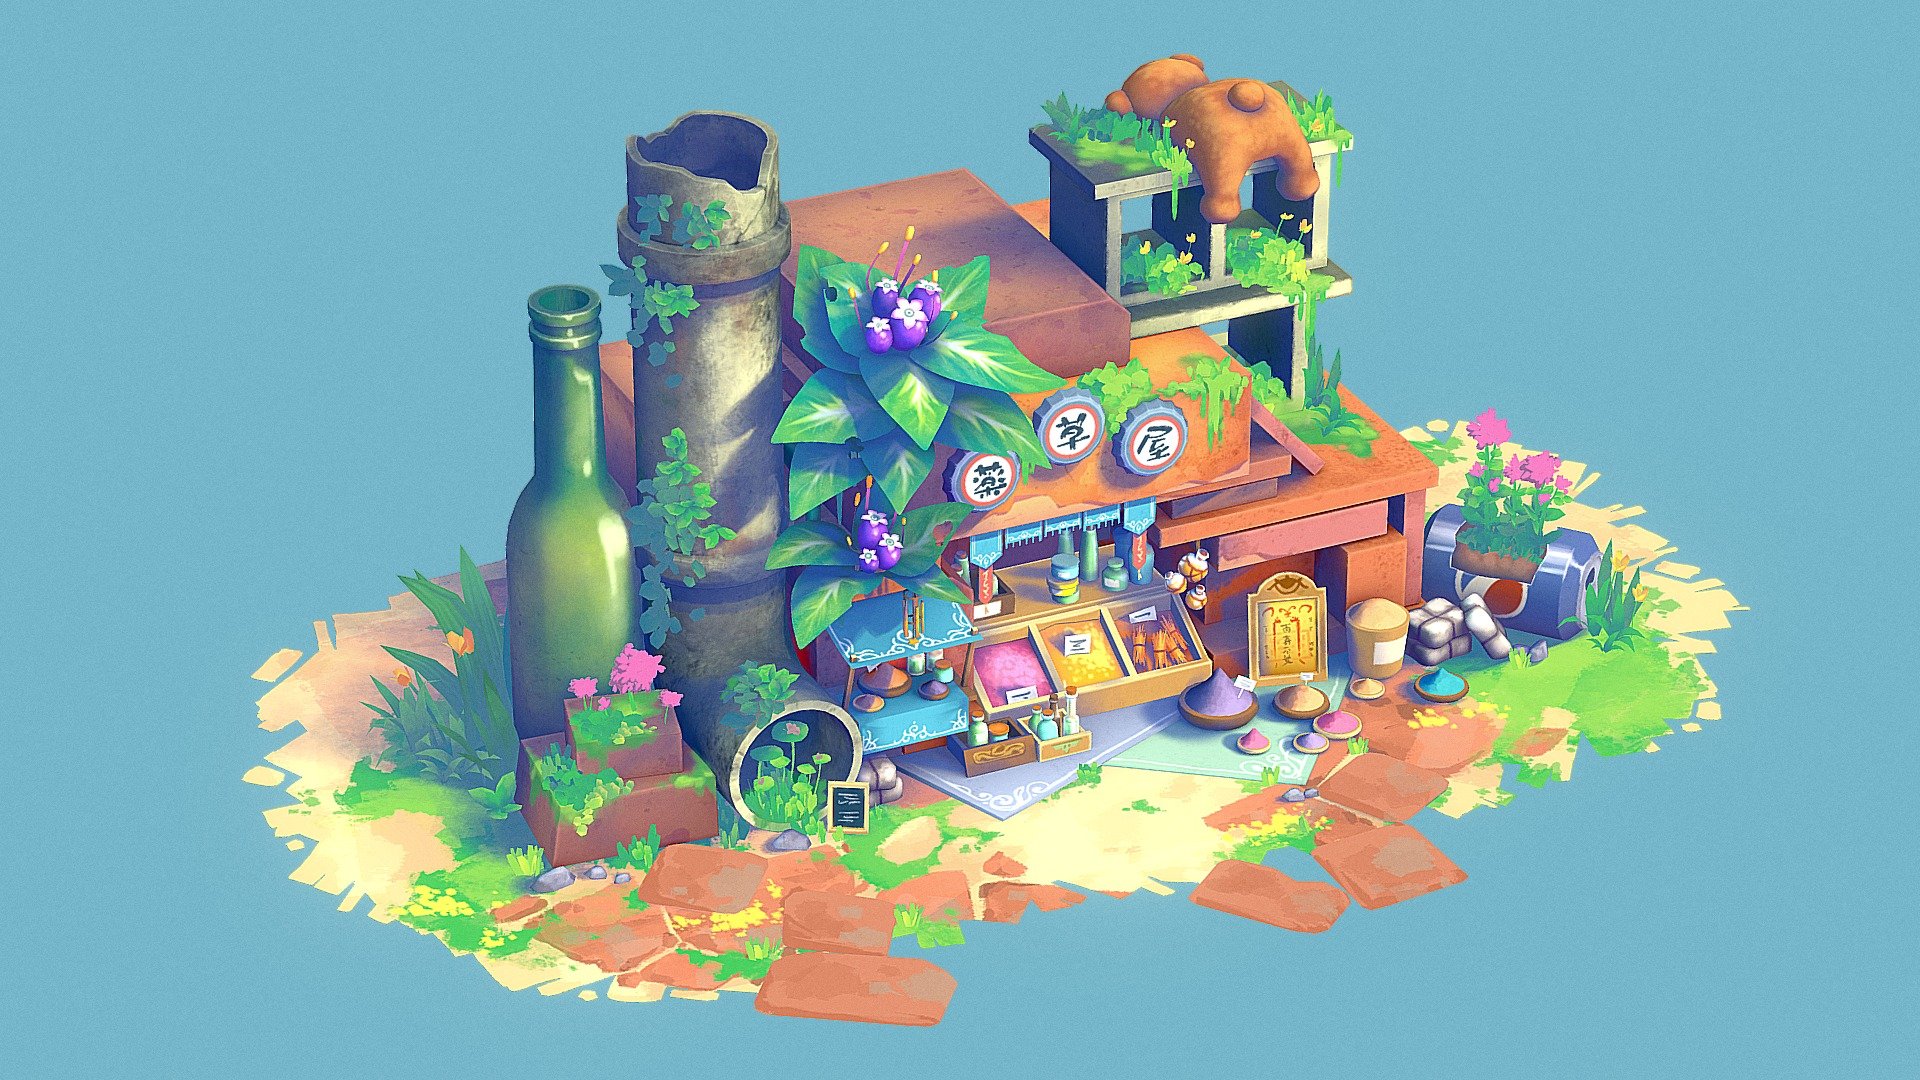 Handpainted small shop ! 

Based on the awesome concept of labuu :
https://www.artstation.com/artwork/nYV3e4

Made with Blender and Substance Painter, rendered in Marmoset 3d model